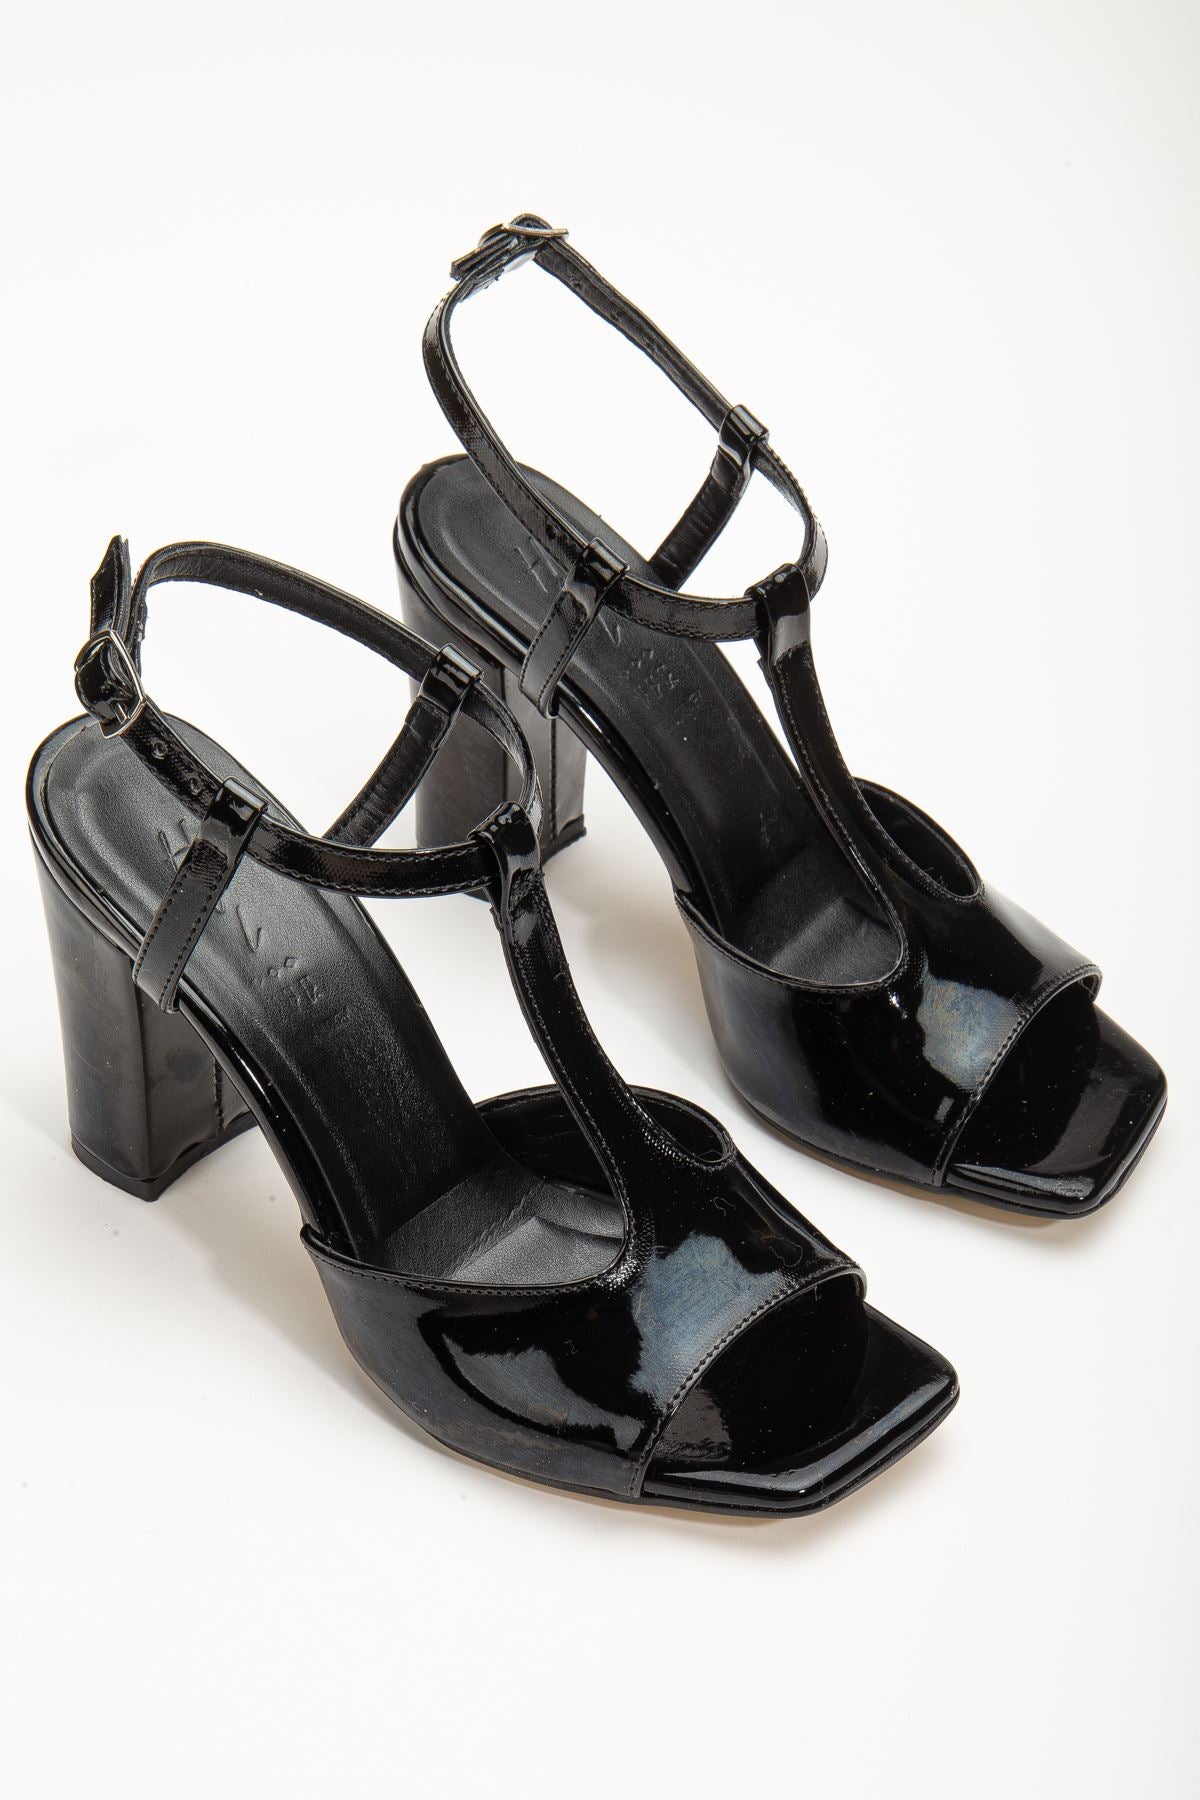 Entela Heeled Black Patent Leather Blunt Toe Women's Shoes - STREETMODE™